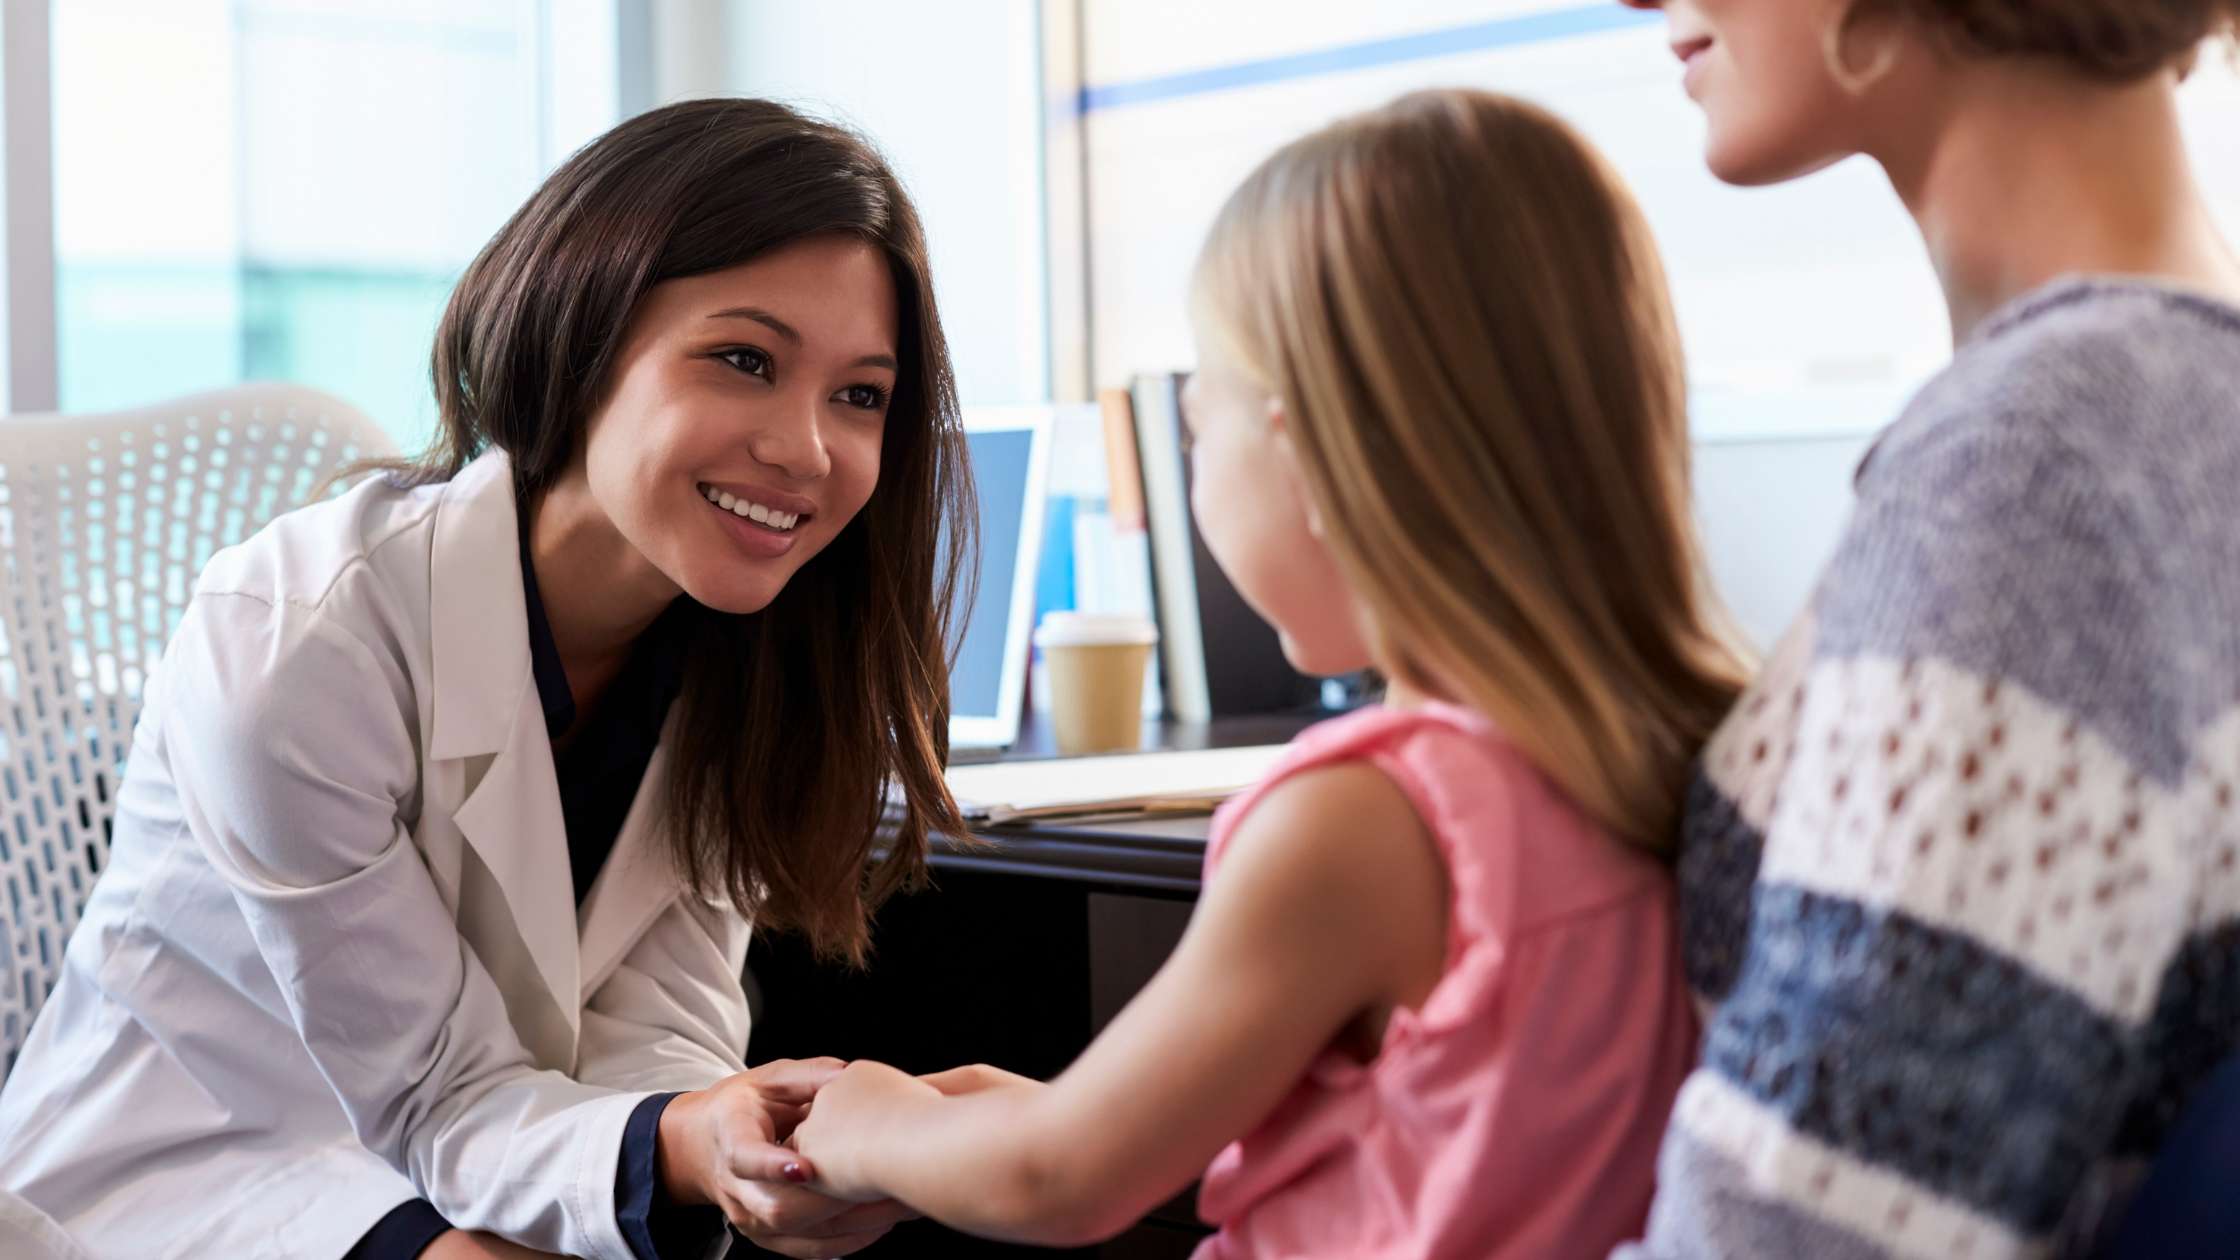 How to Find the Perfect Pediatrician for Your Child - Medical Health Associates of Western New York - Featured Image